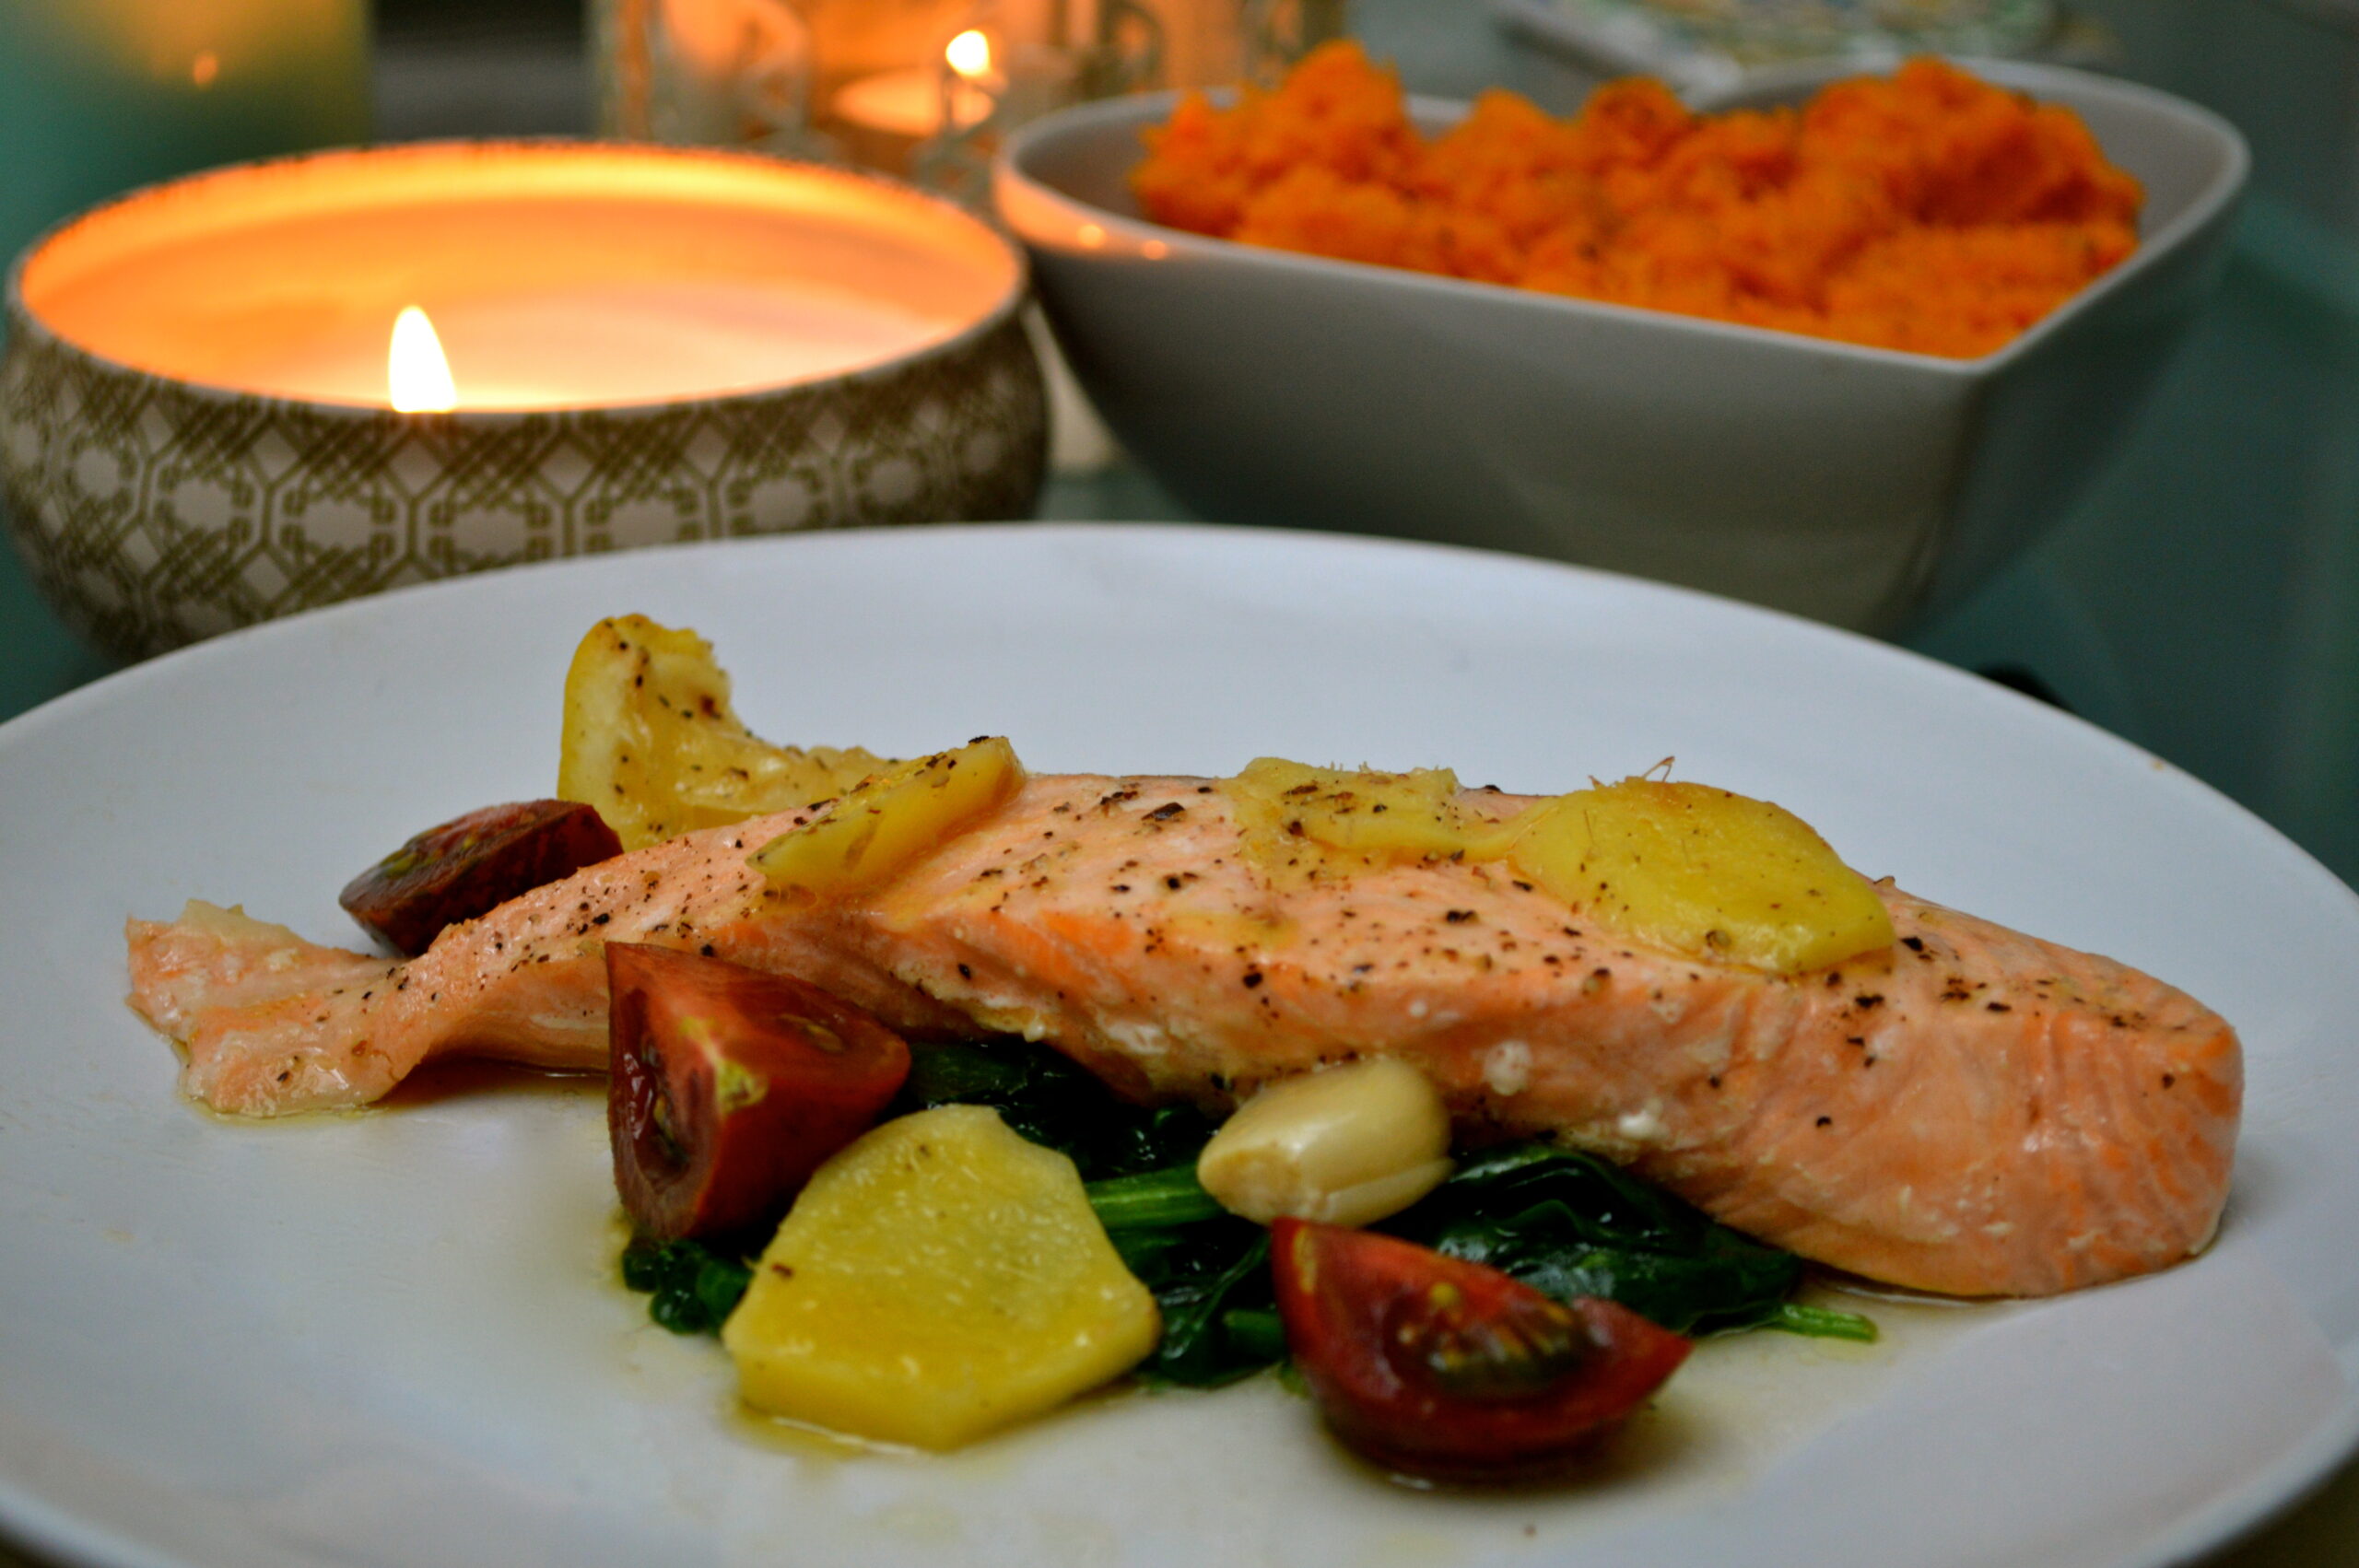 Baked salmon with ginger, lemon and garlic